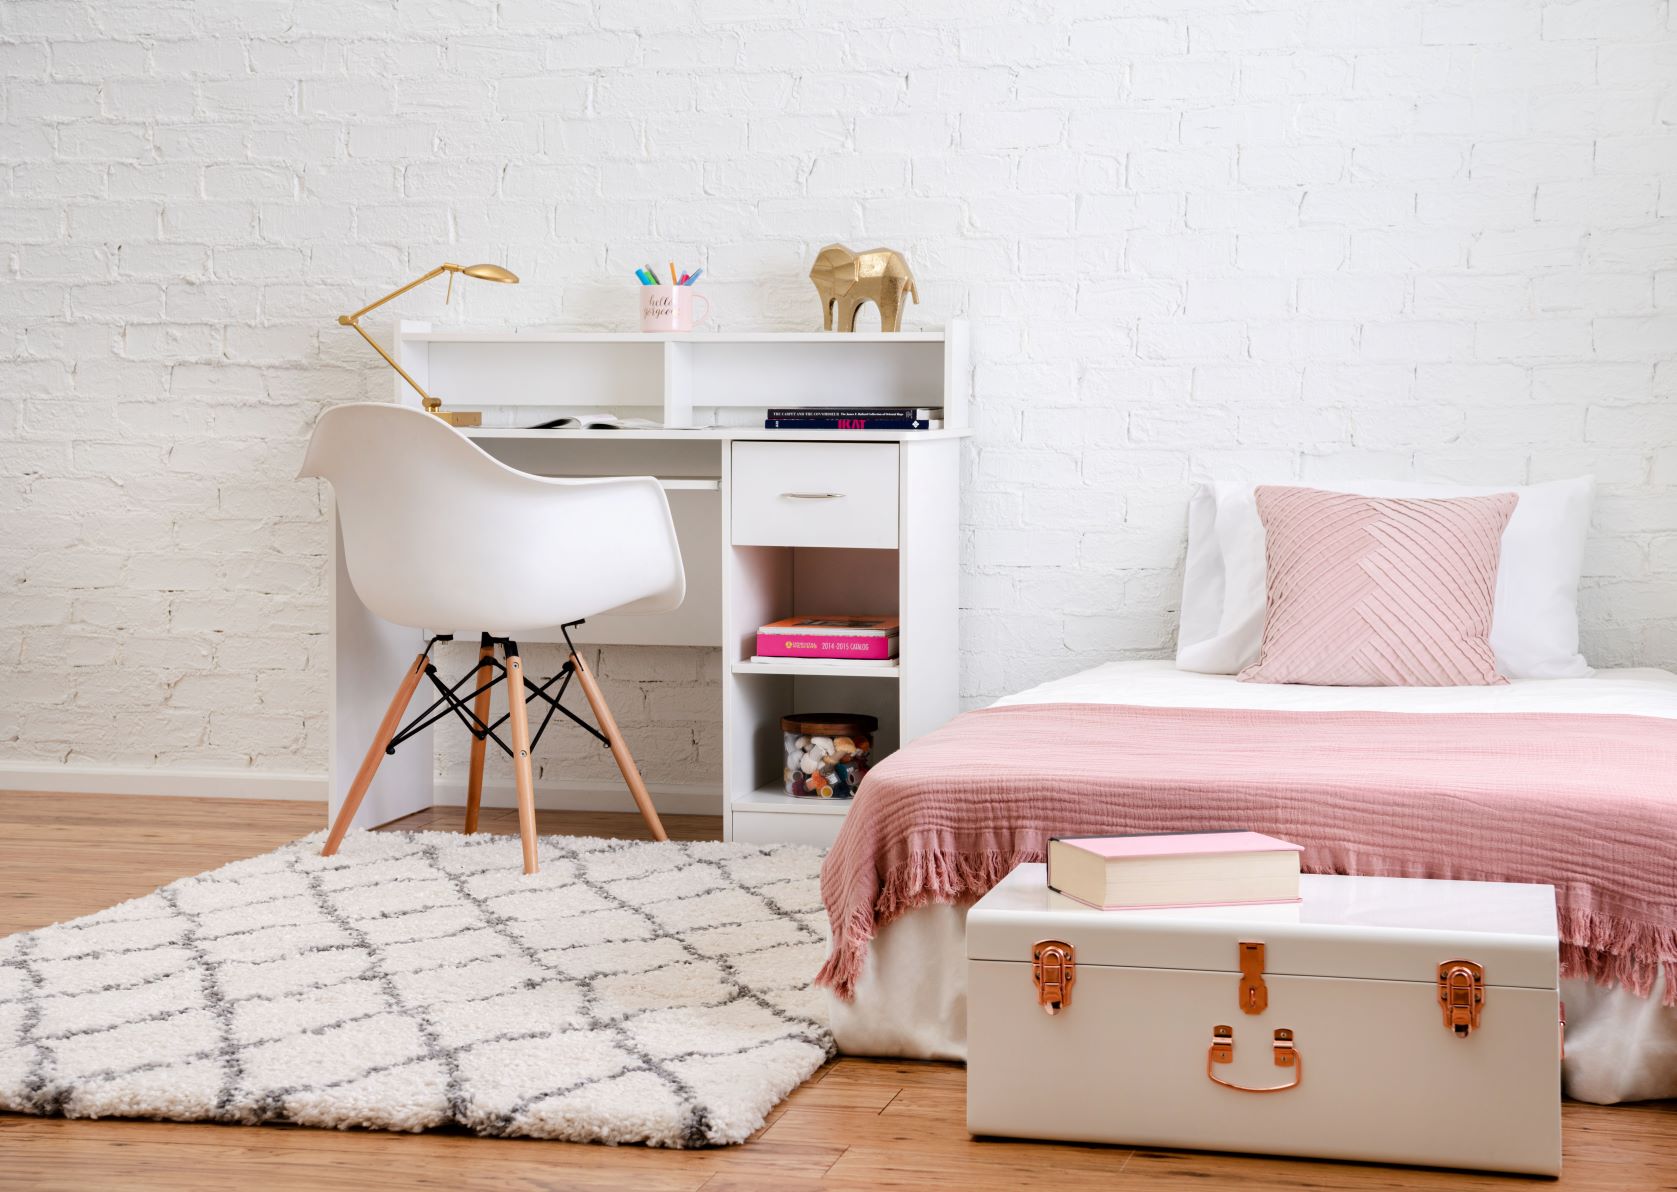 7 Dorm Room Organizing Rules For Less Clutter And More Space